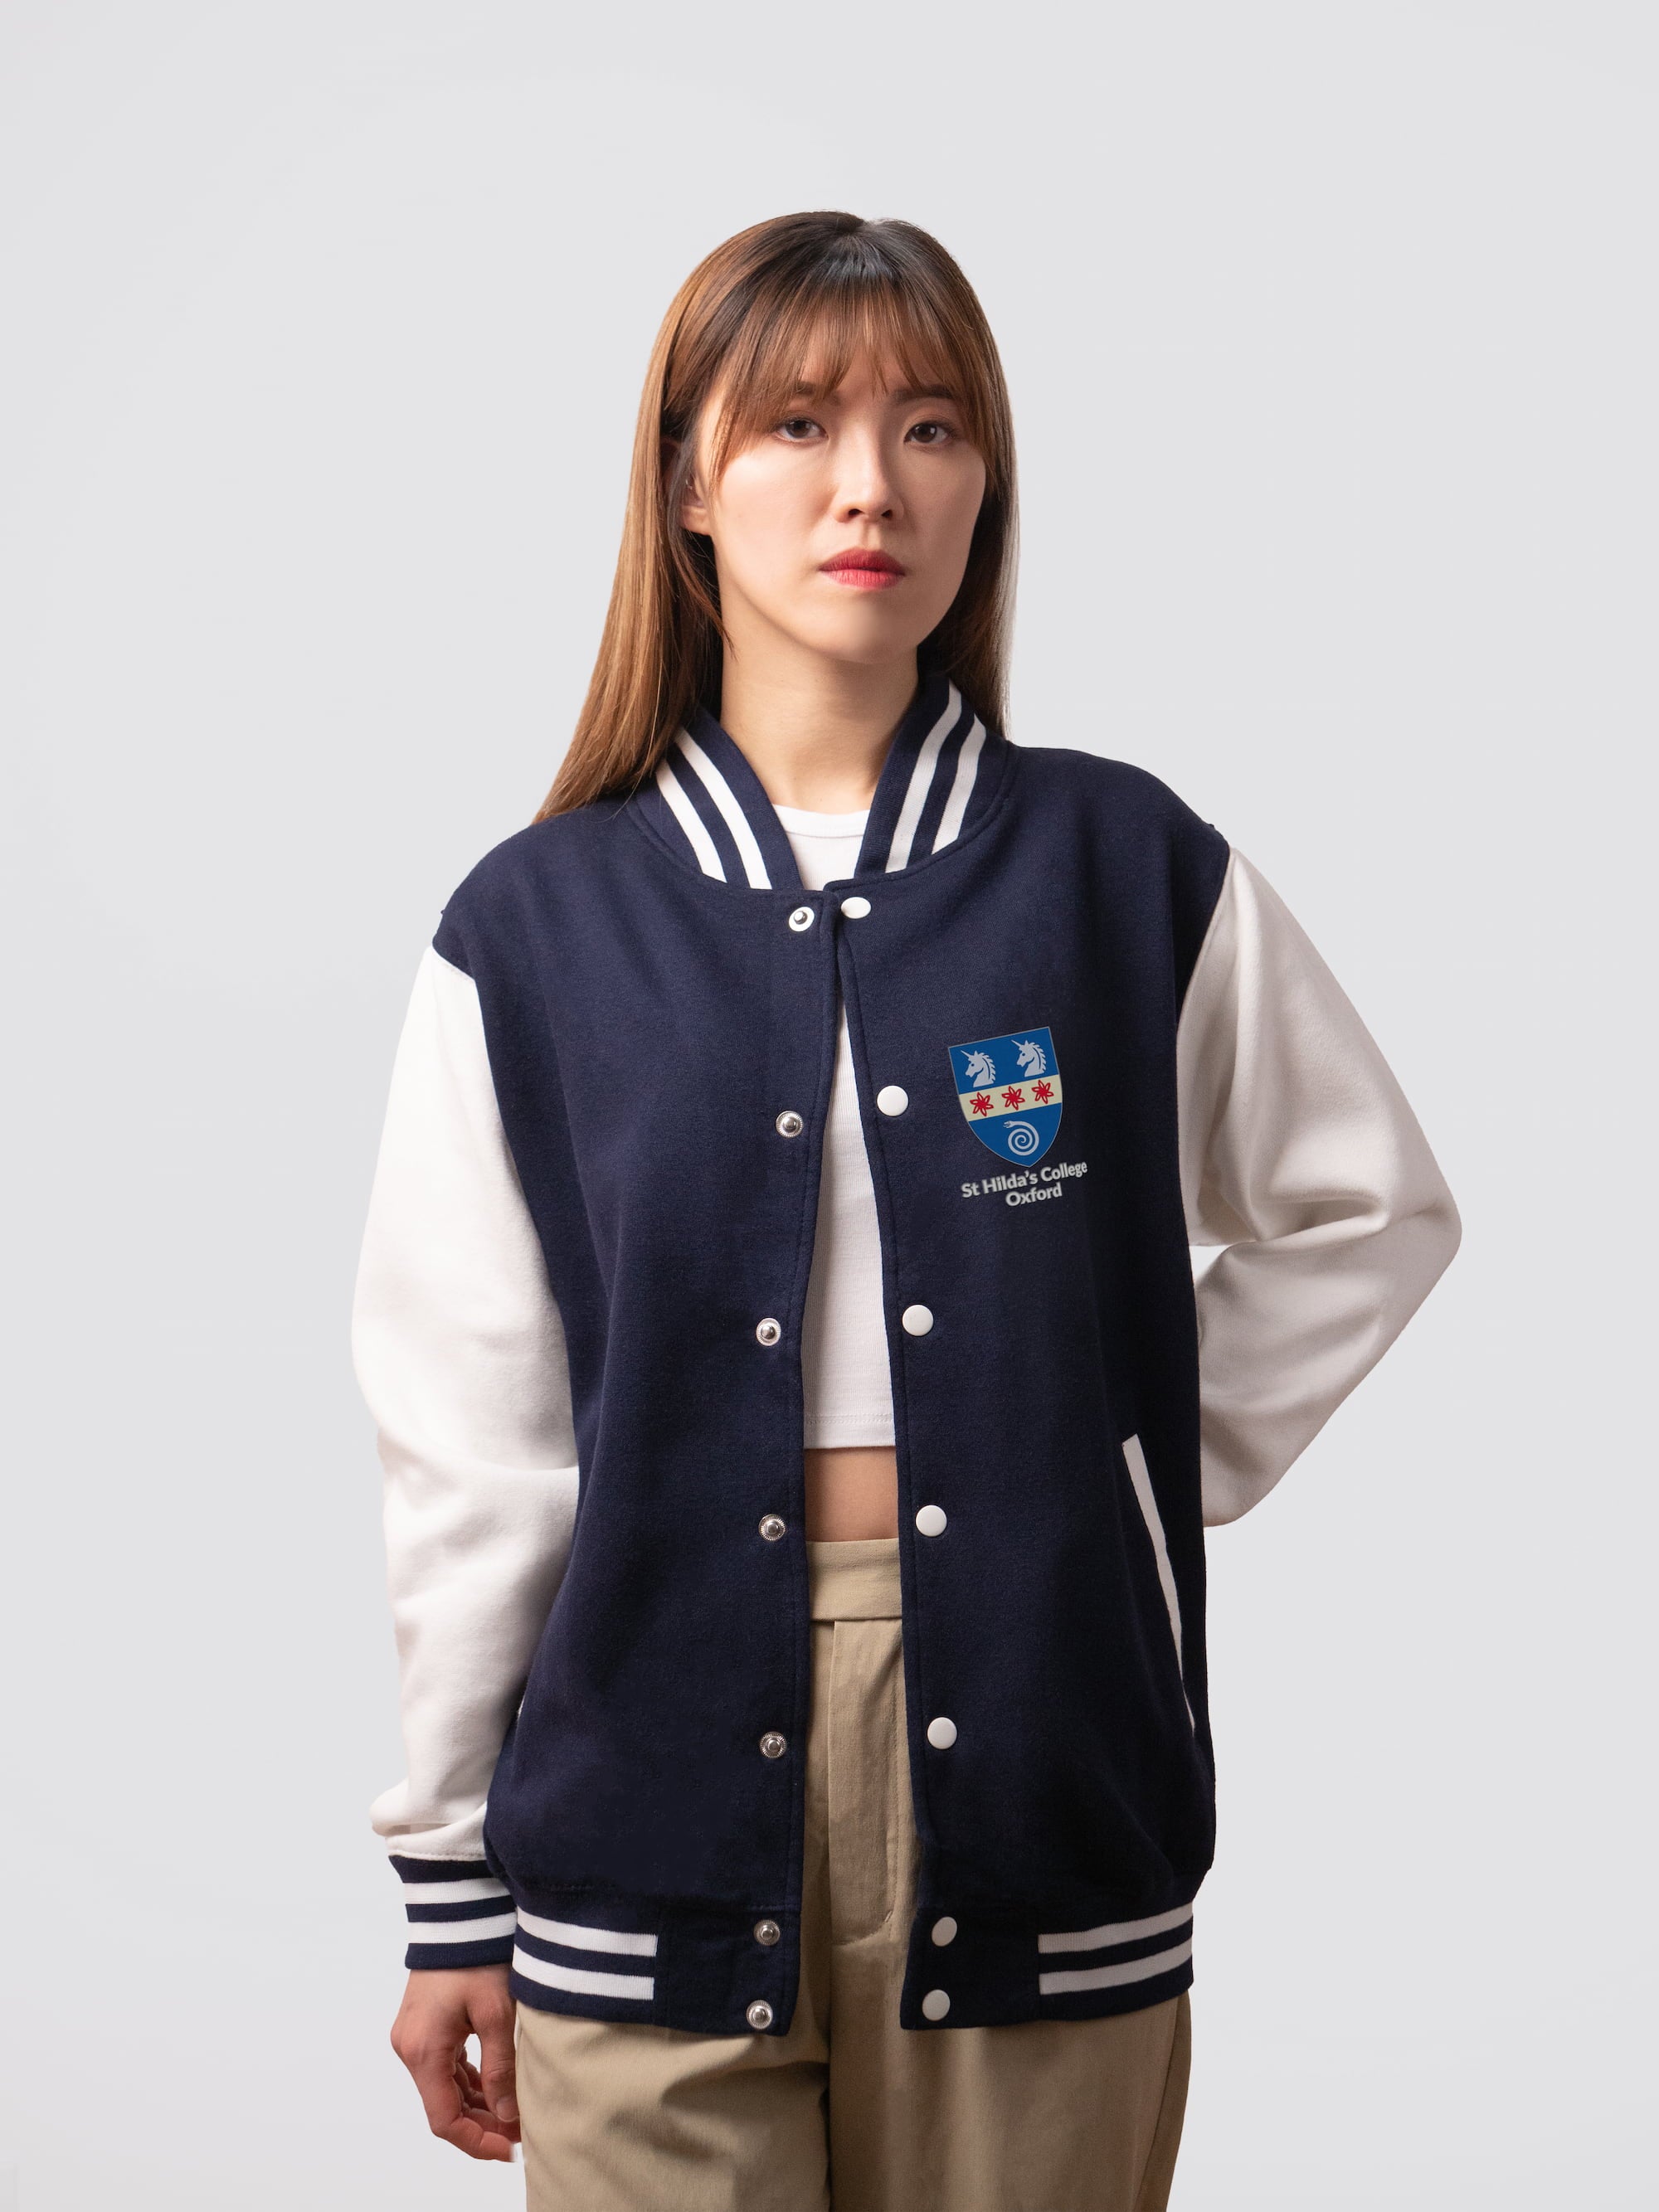 Retro style varsity jacket, with embroidered St Hilda's College crest